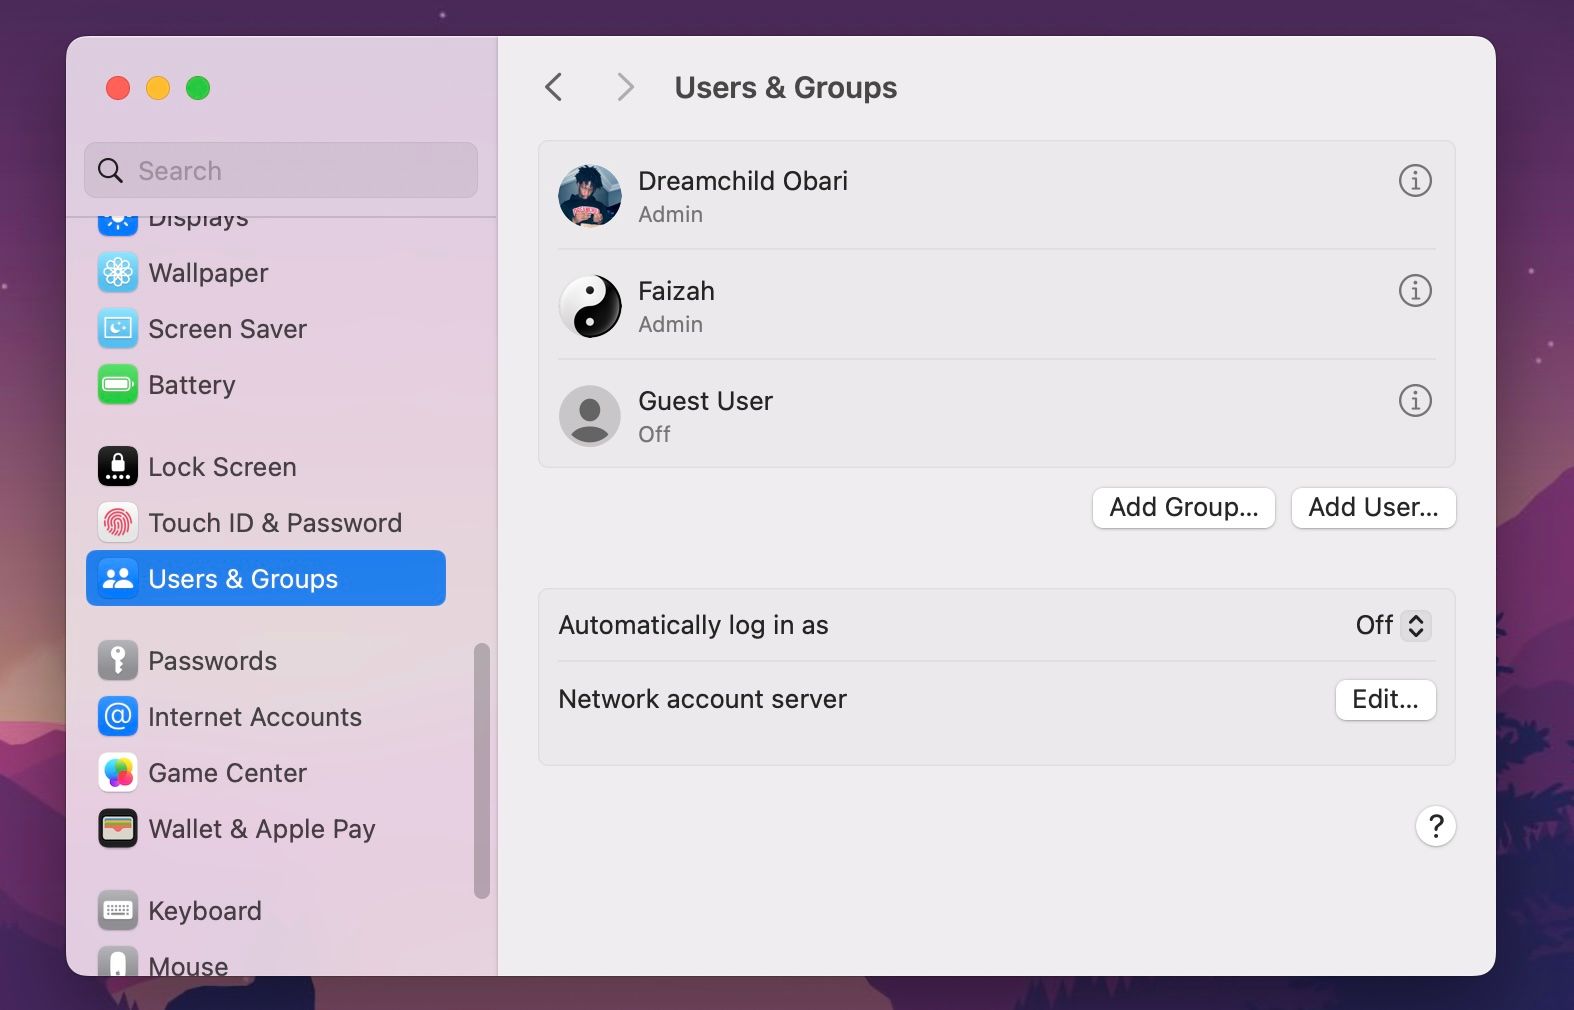 Users & Groups section of System Settings